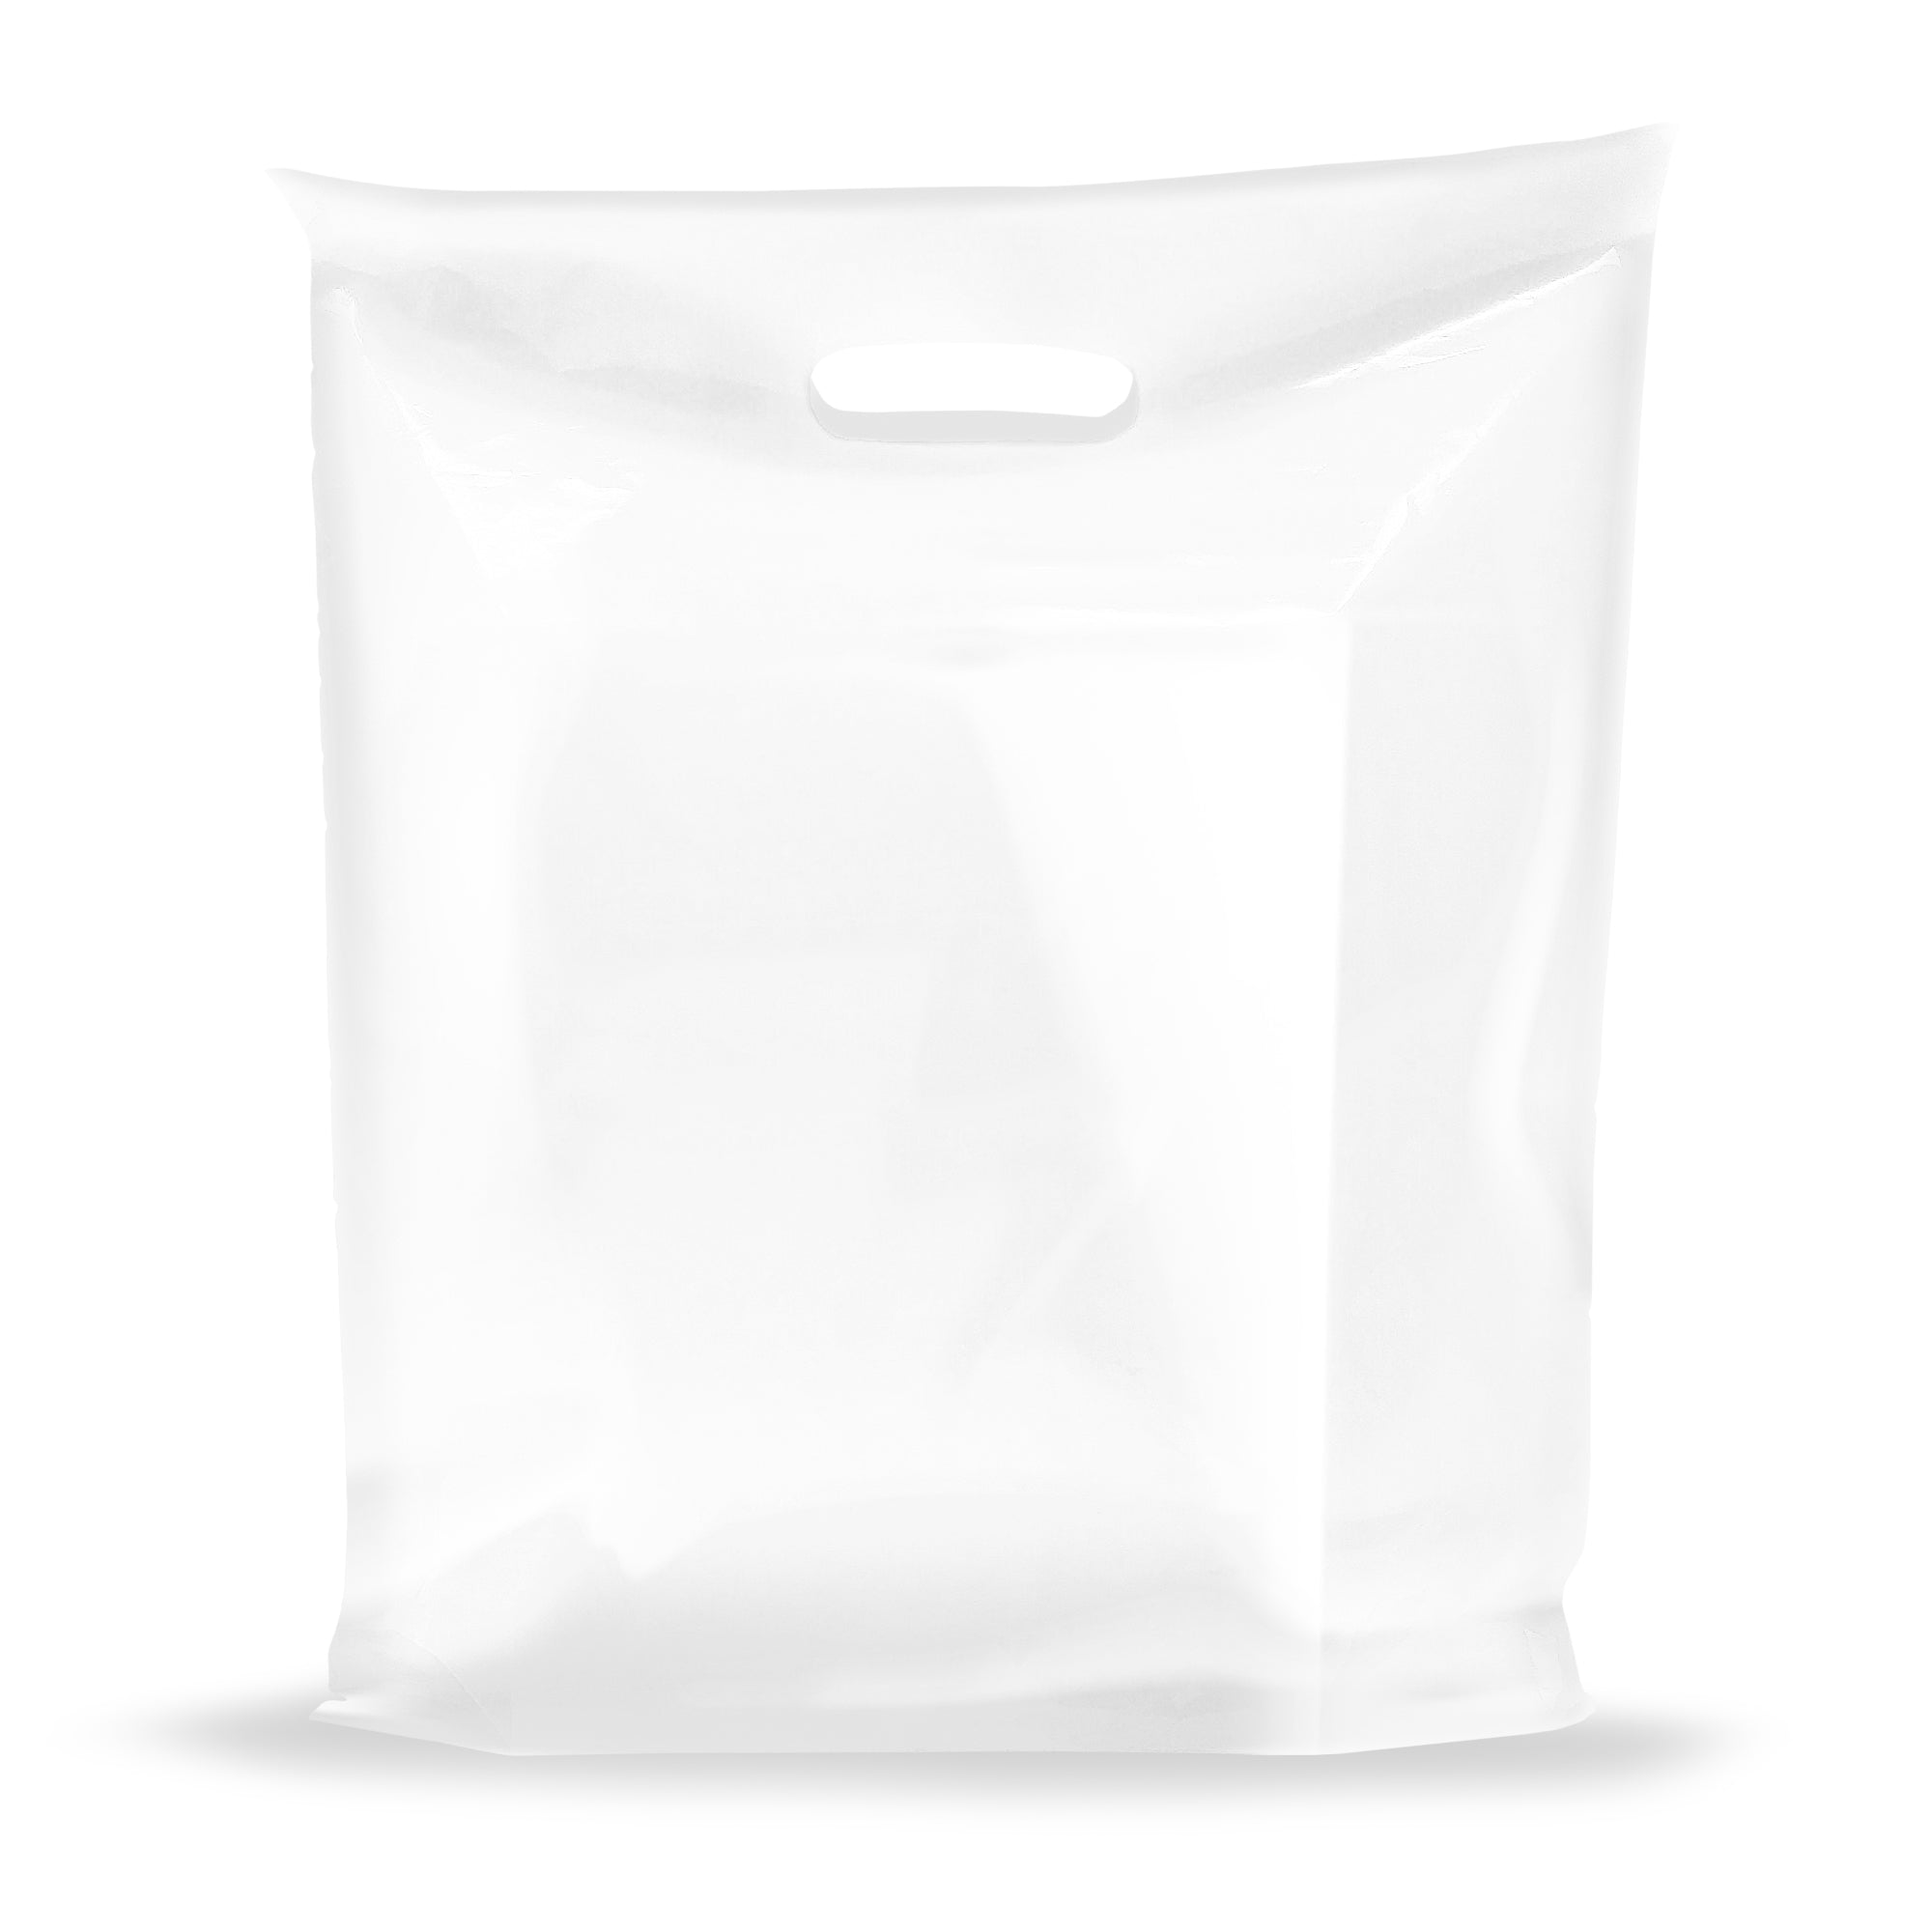 Gogmooi Clear Bags 100 Pcs Plastic Bags with Handles Bulk Frosted Large  Plast